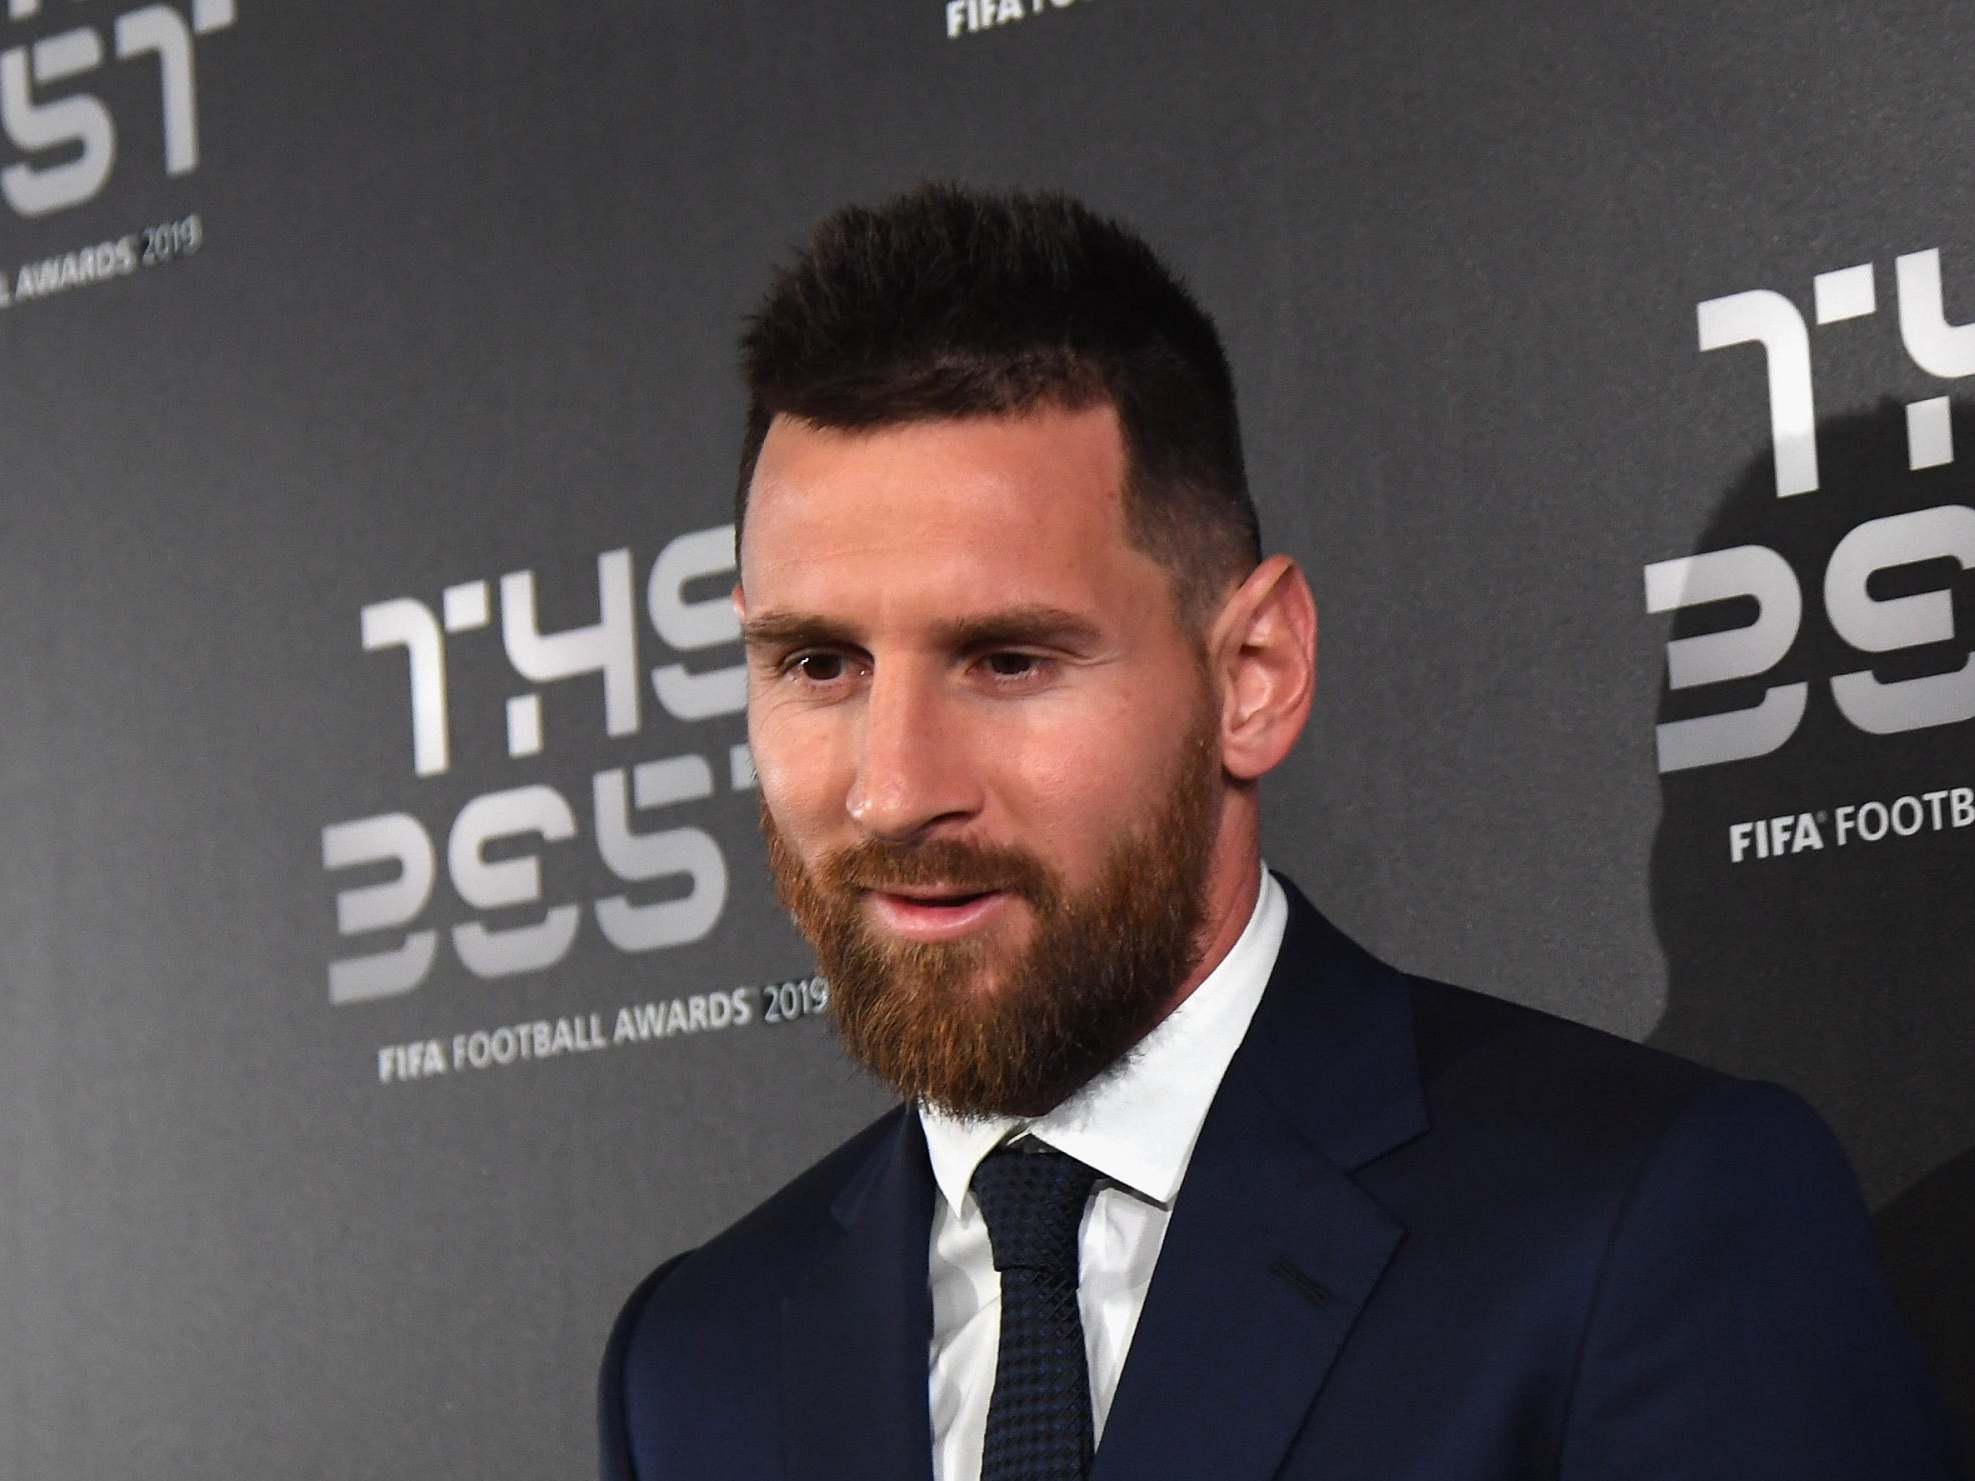 Messi voted for Ronaldo, who did not return the favour